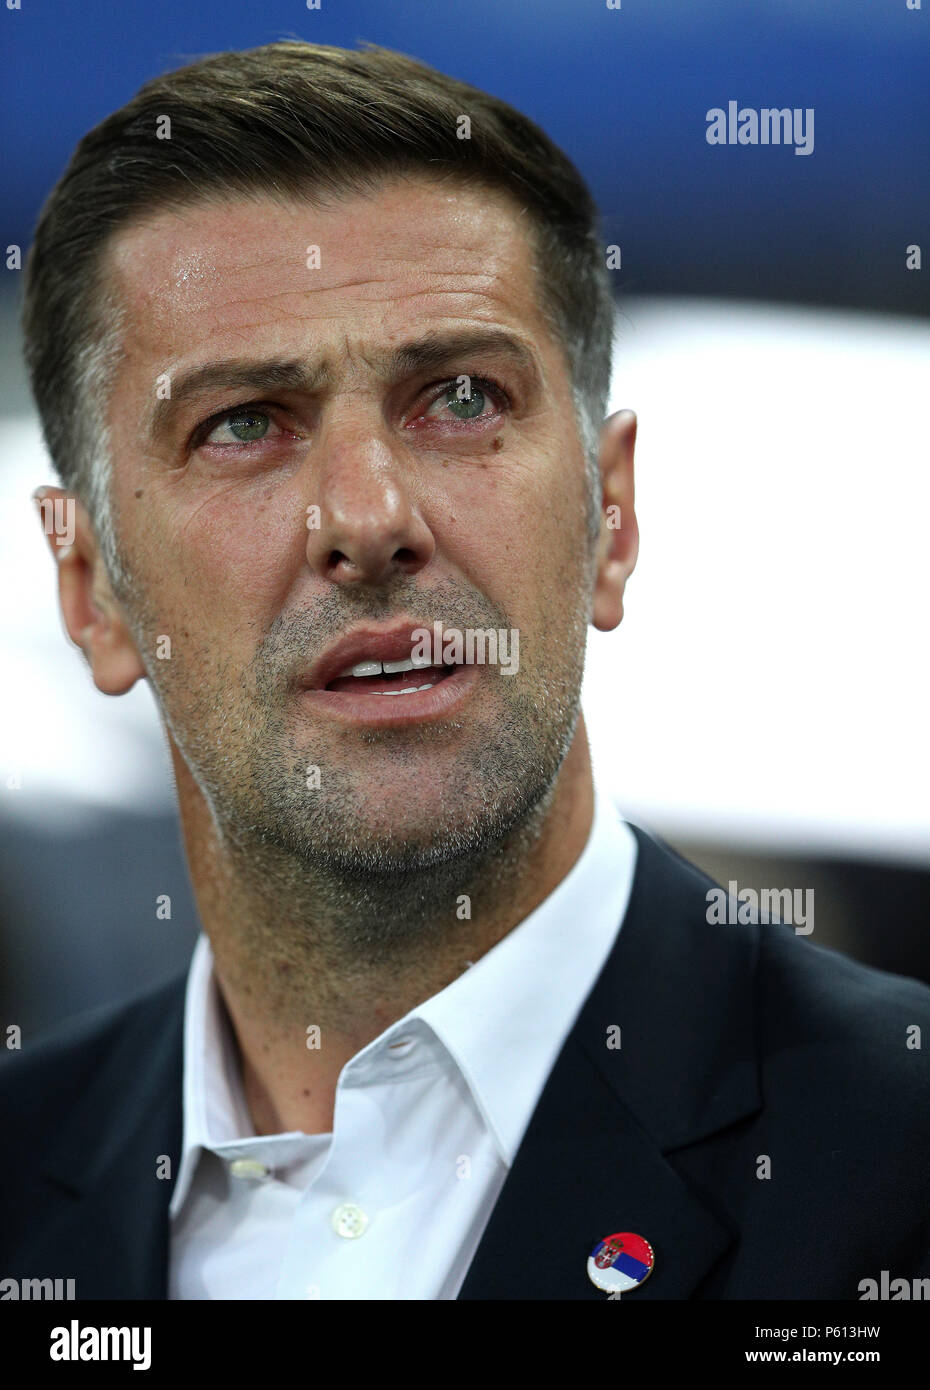 Moscow, Russia, 27 June 2018. SERBIA VS BRAZIL - Serbia coach Mladen Krstajic during the match between Serbia and Brazil valid for the 2018 World Cup held at the Otkrytie Arena (Spartak) in Moscow, Russia. (Photo: Rodolfo Buhrer/La Imagem/Fotoarena) Credit: Foto Arena LTDA/Alamy Live News Stock Photo